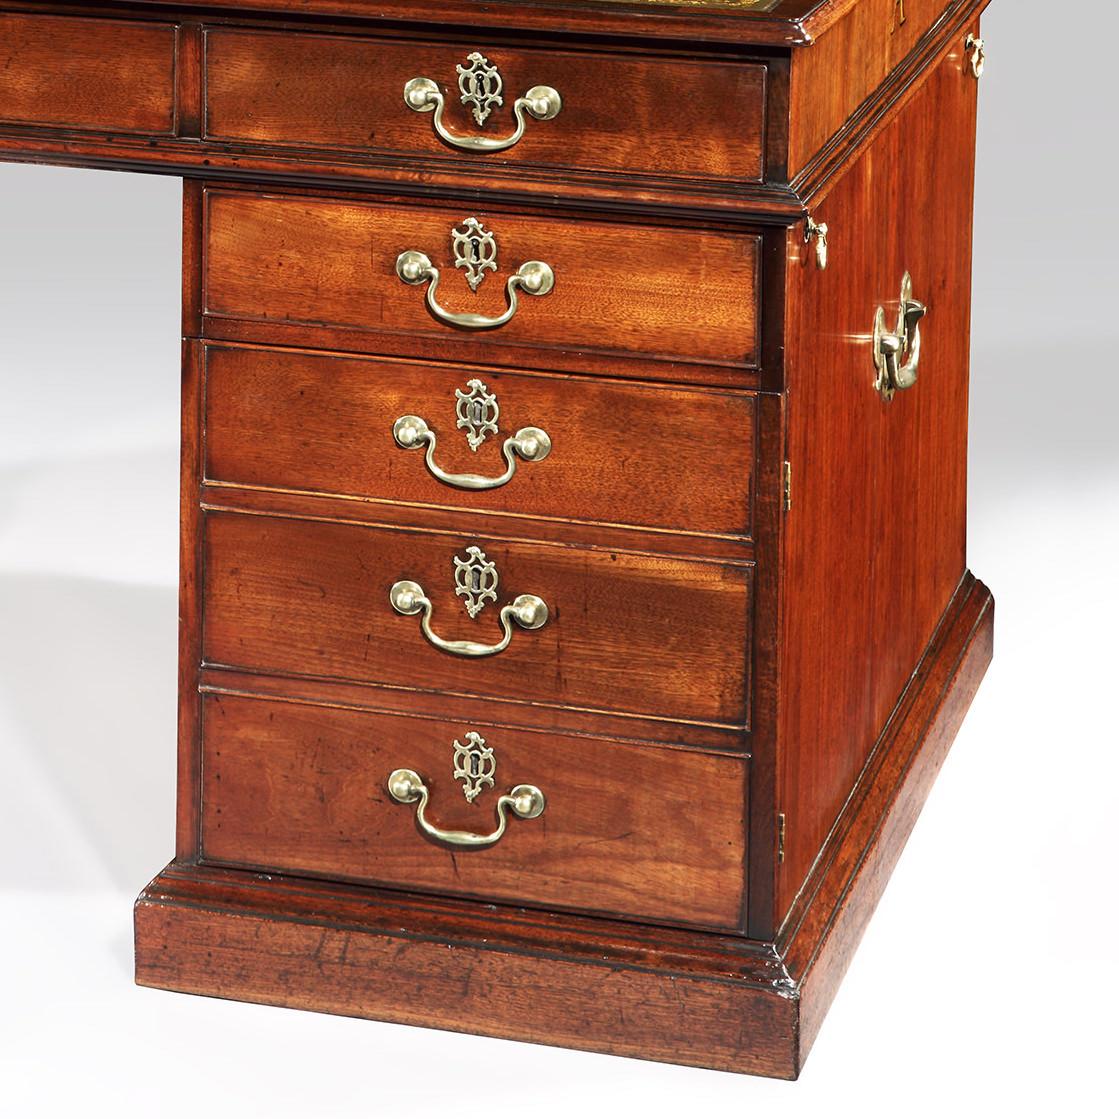 Constructed in a well patinated San Domingo mahogany of rectangular form, rising from a plinth base, the pedestals with laterally opposed banks of four oak lined lockable drawers, fitted with internal dividers and dressed with swan neck brass